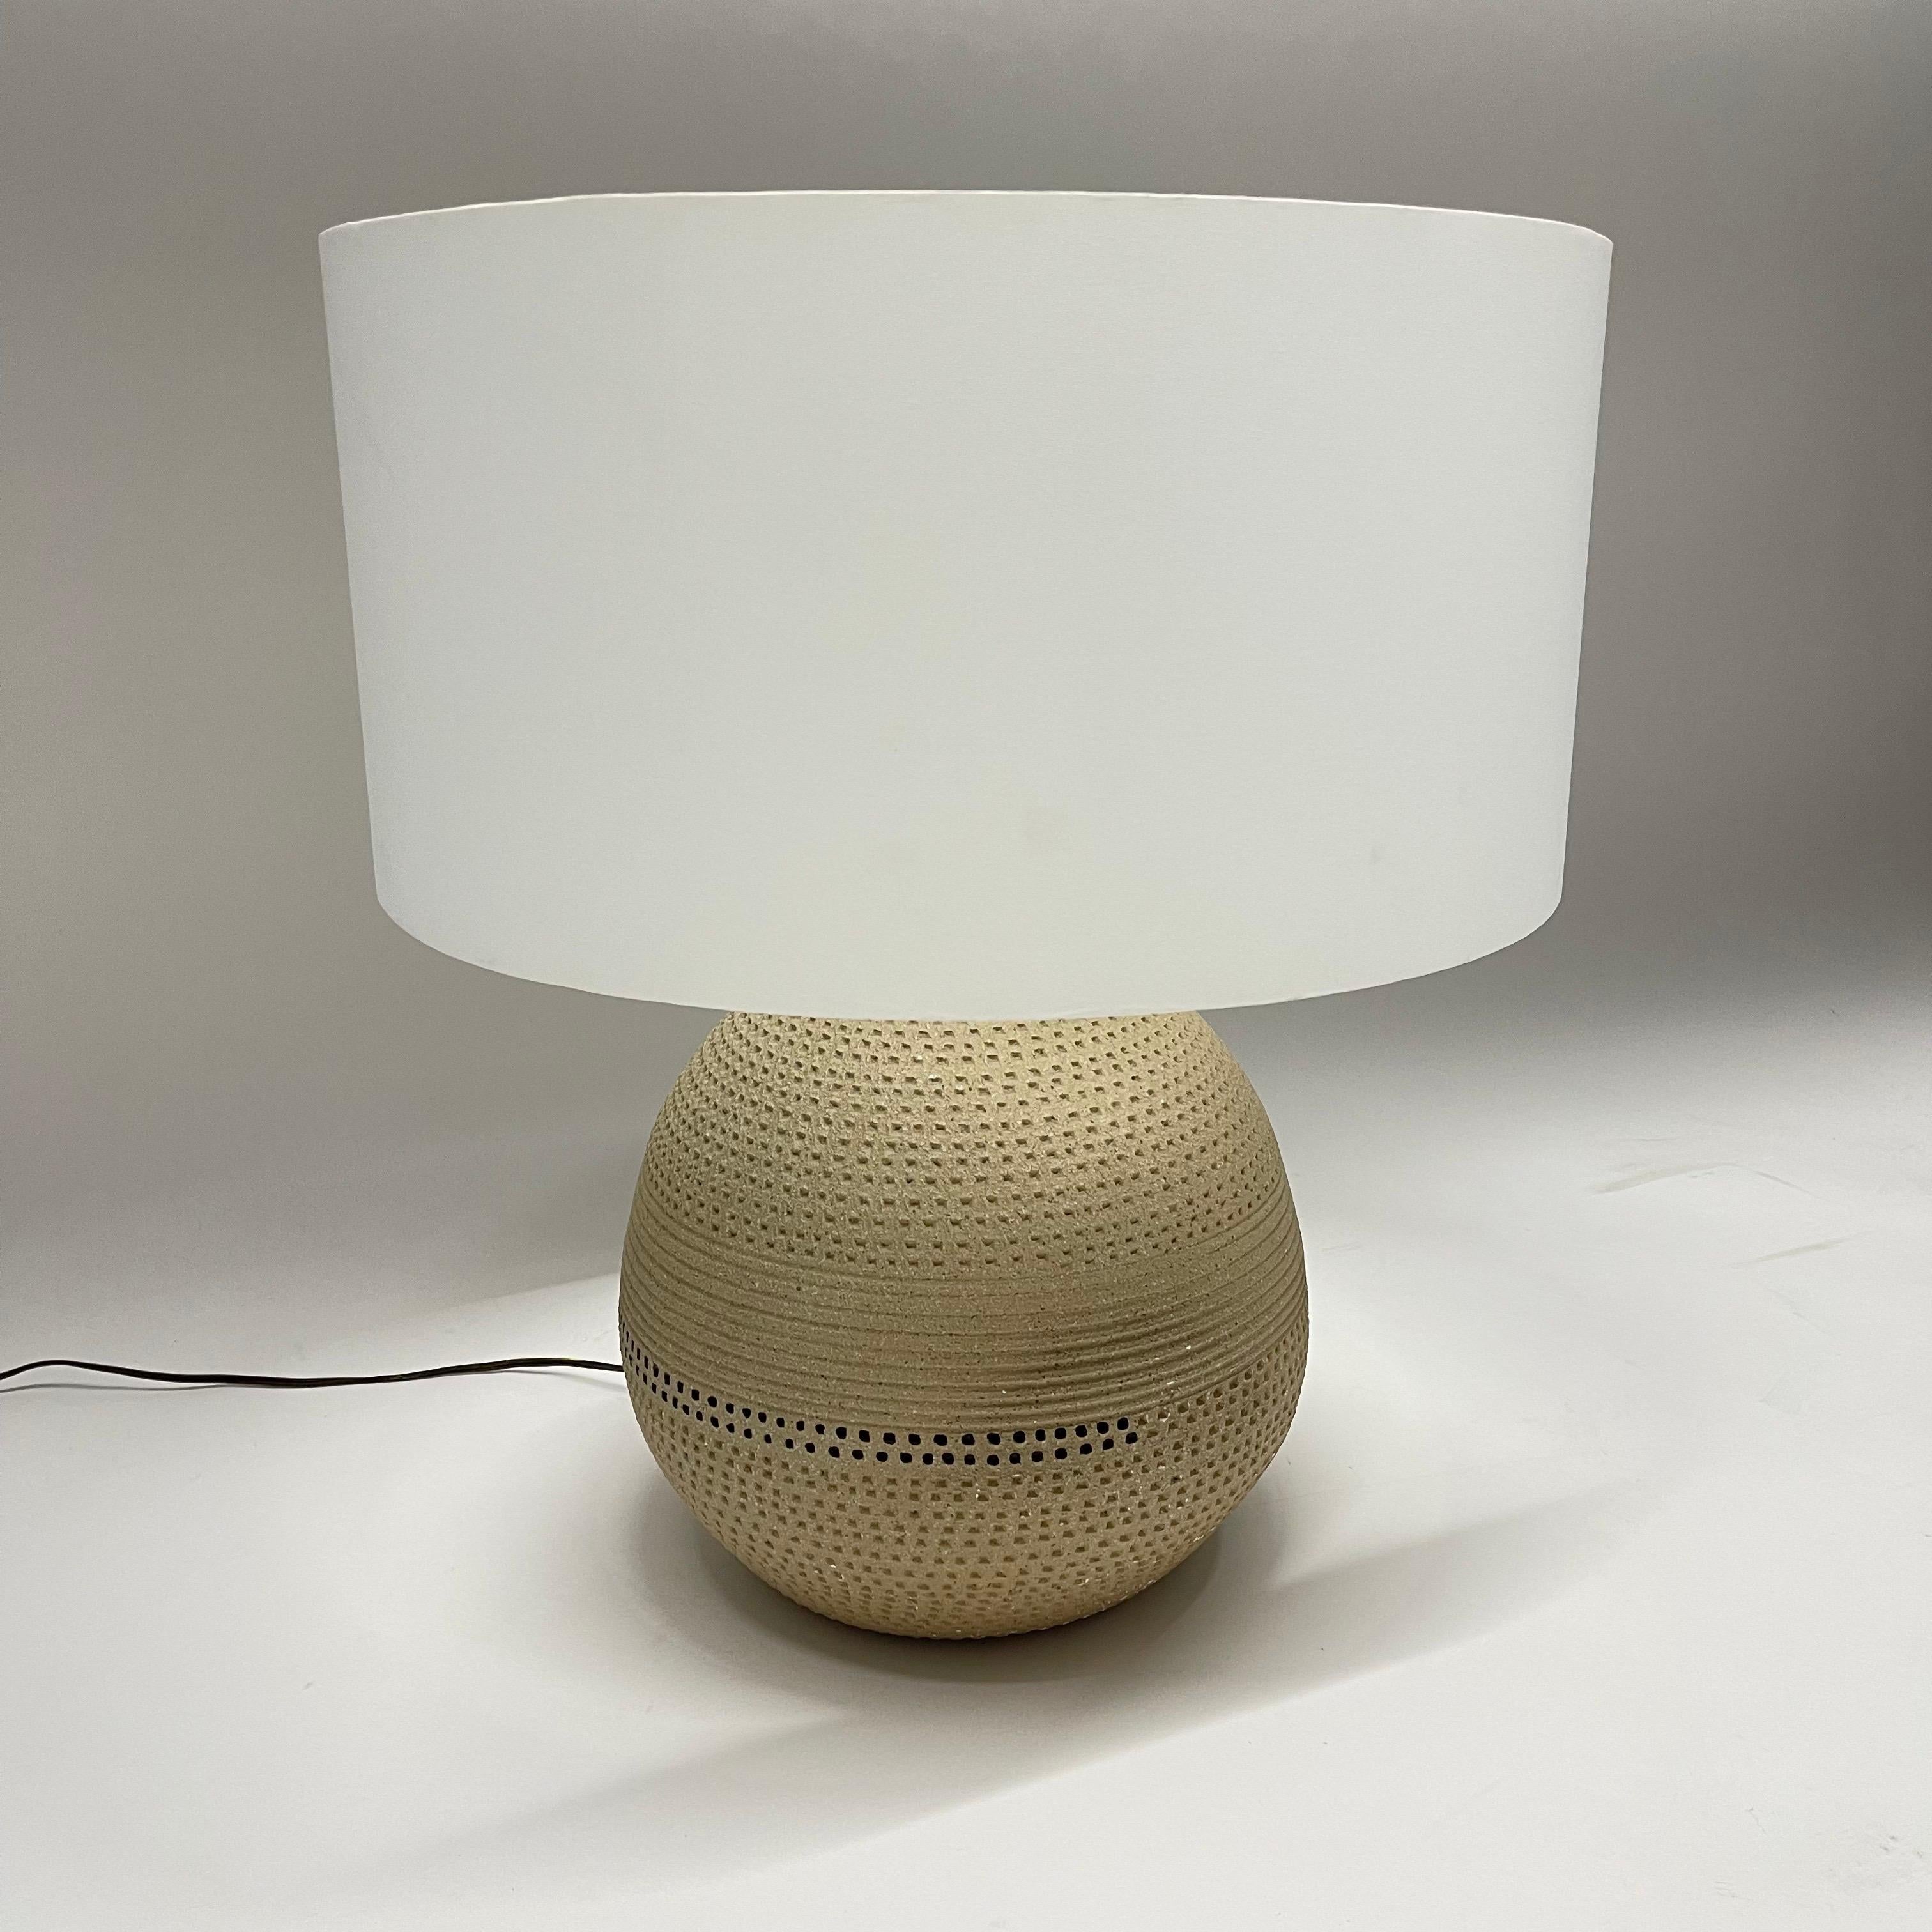 Stunning organic lamp rendered in natural beige brown ceramic pottery by Jane & Gordon Martz for Marshall Studios.

Lamp base dimensions:
13